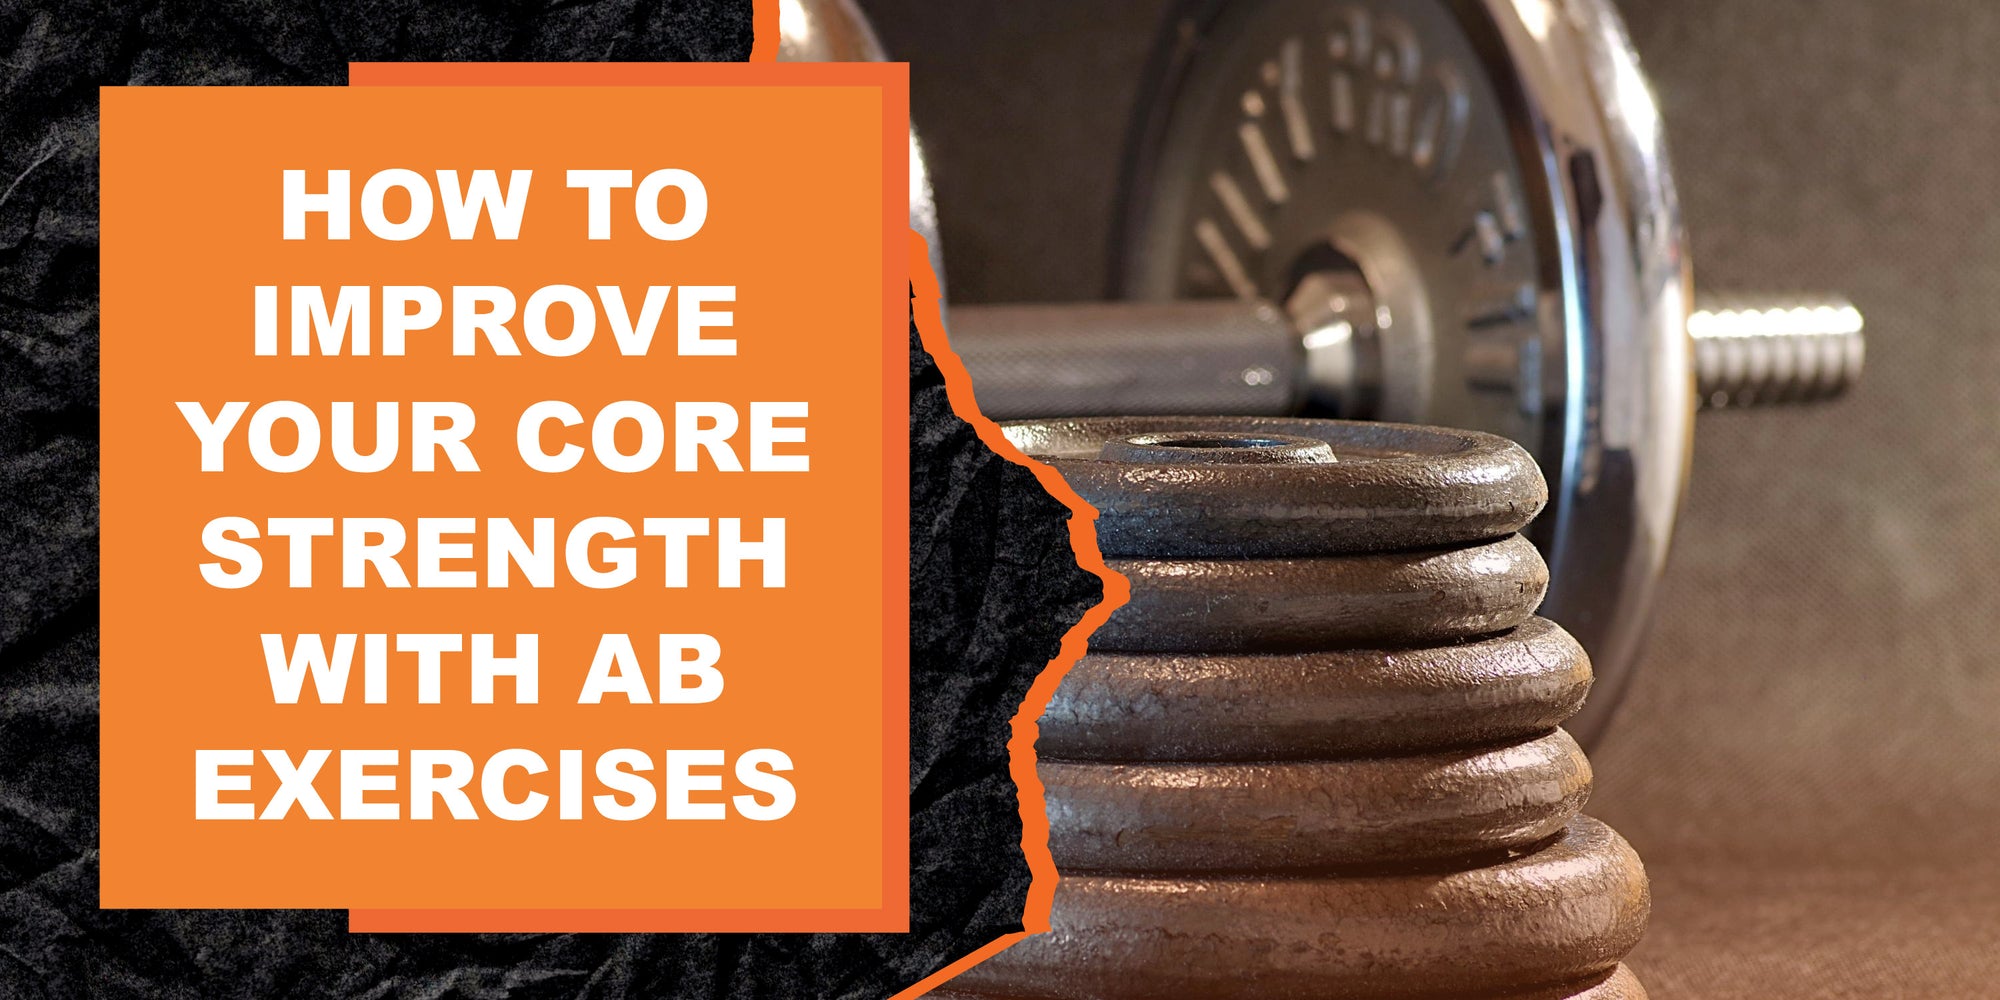 How to Improve Your Core Strength with Ab Exercises